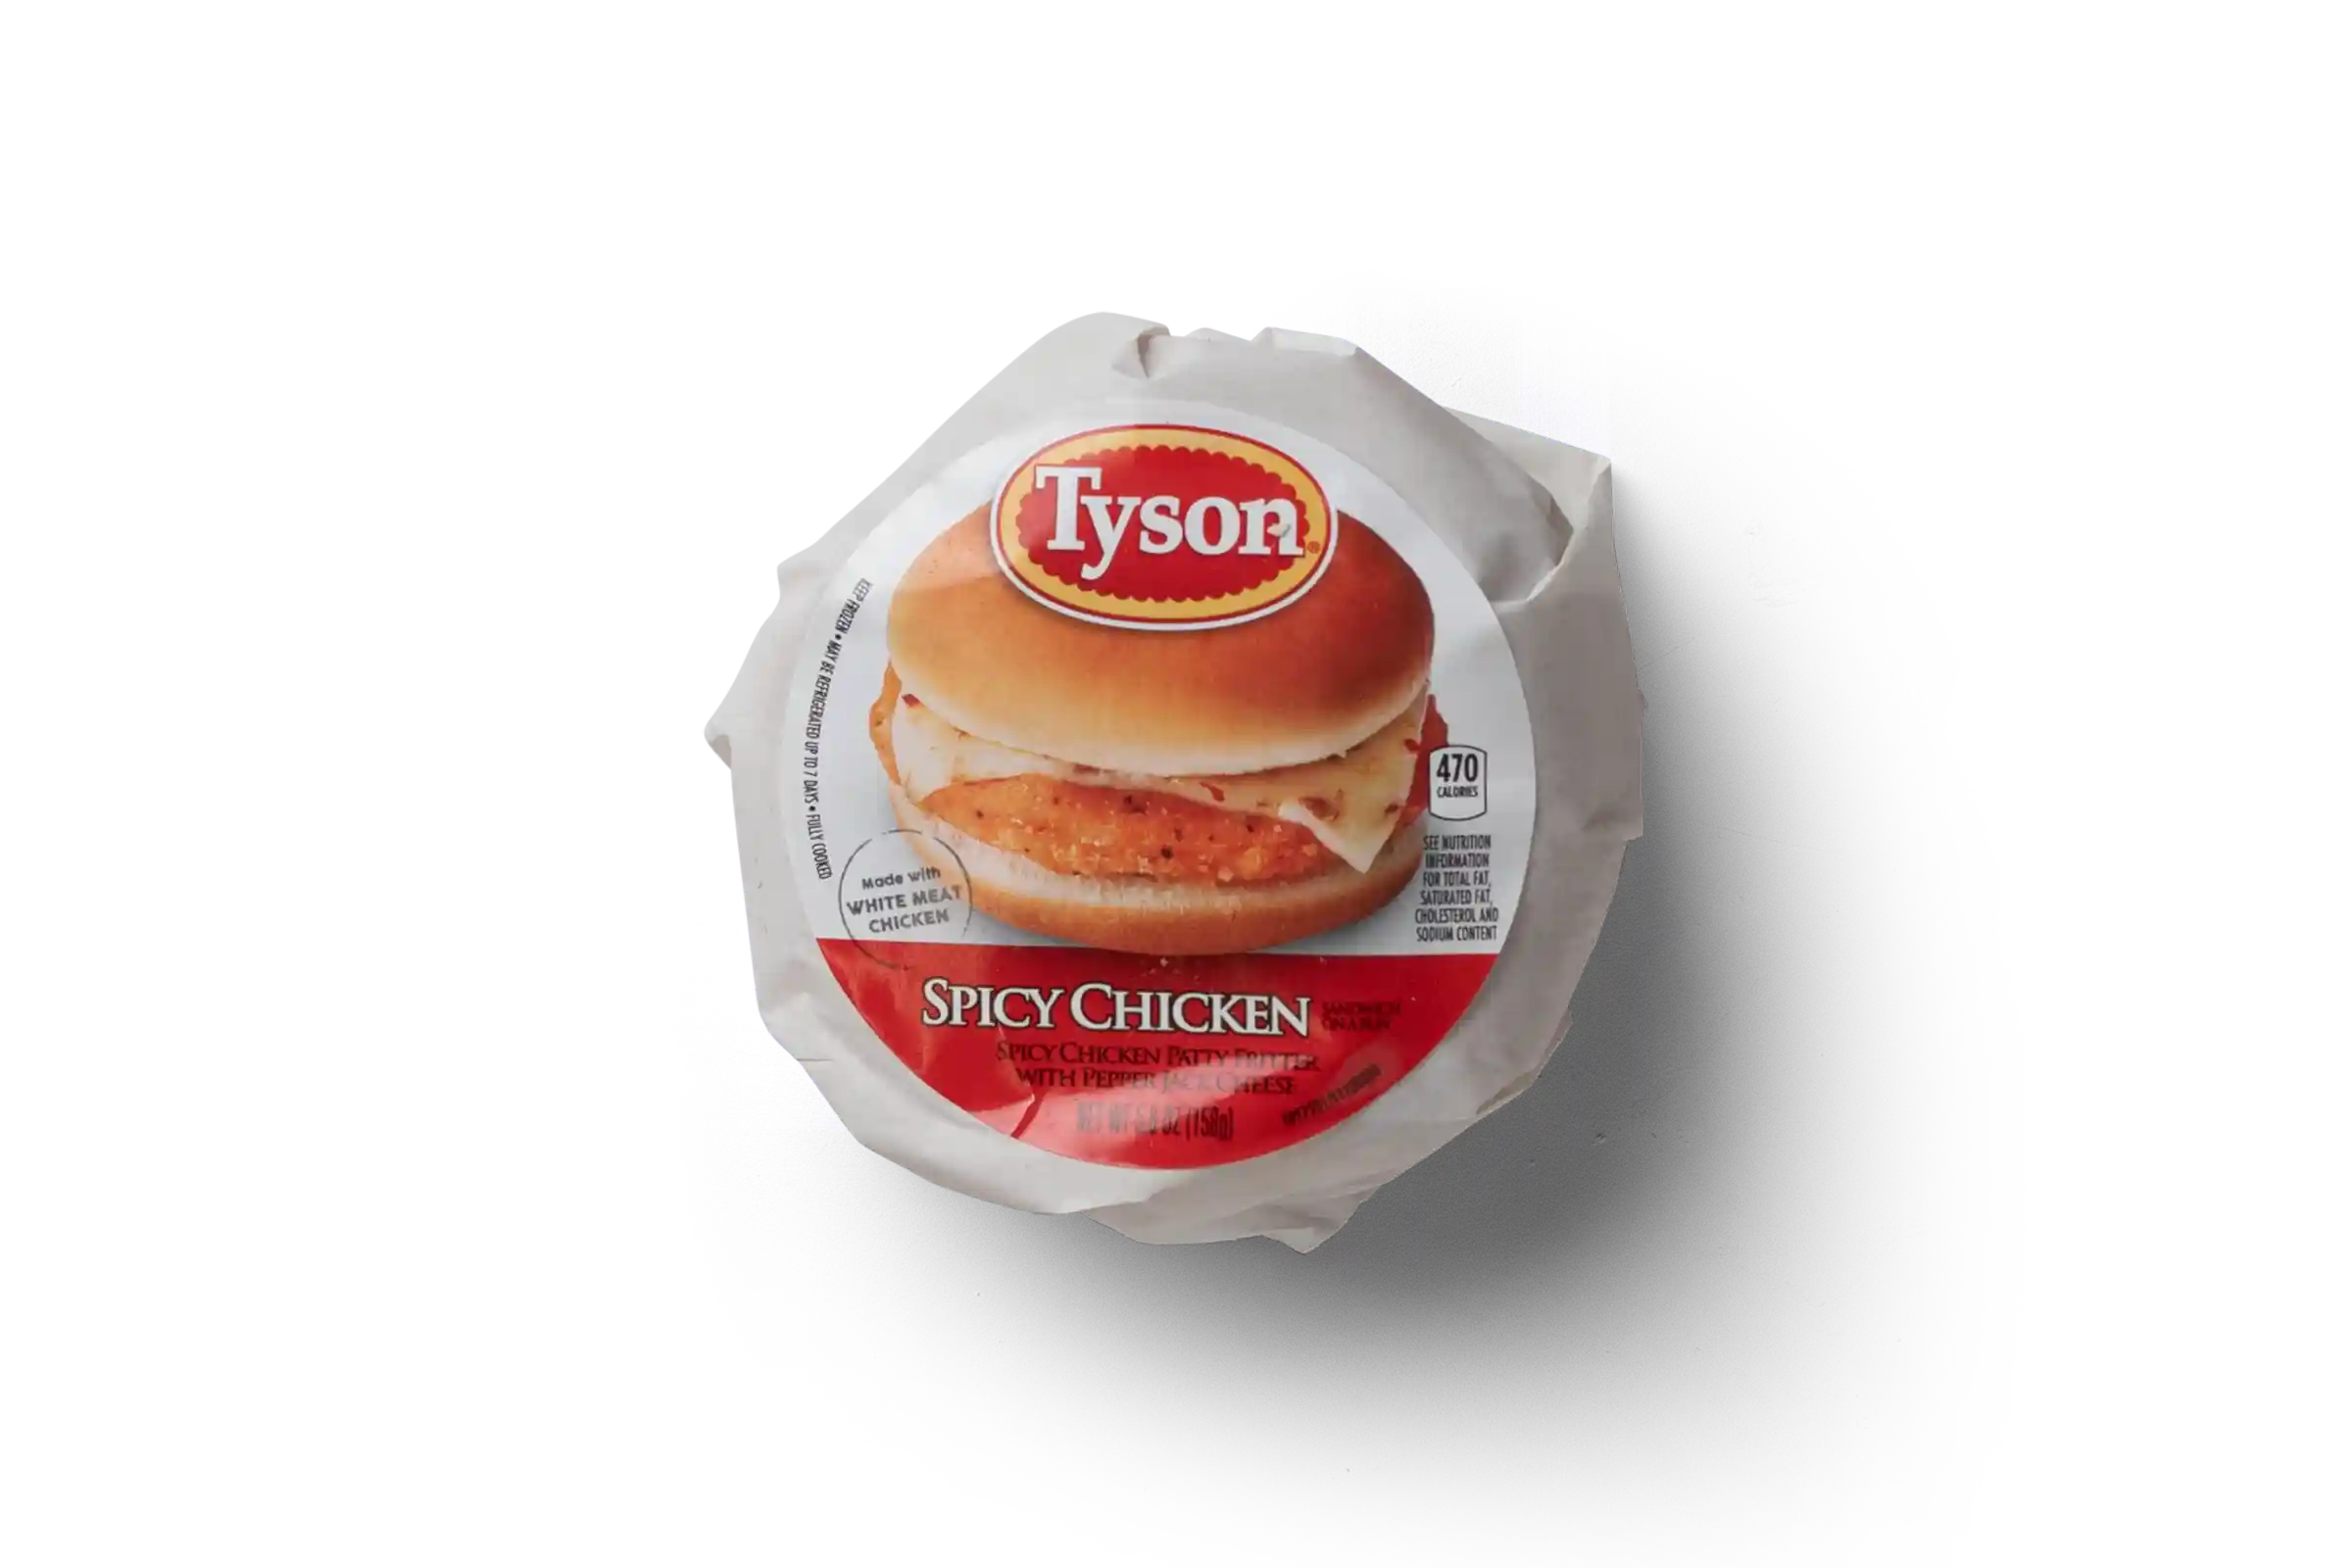 Tyson® Spicy Chicken Sandwich with Pepper Jack Cheese on a Bun_image_21